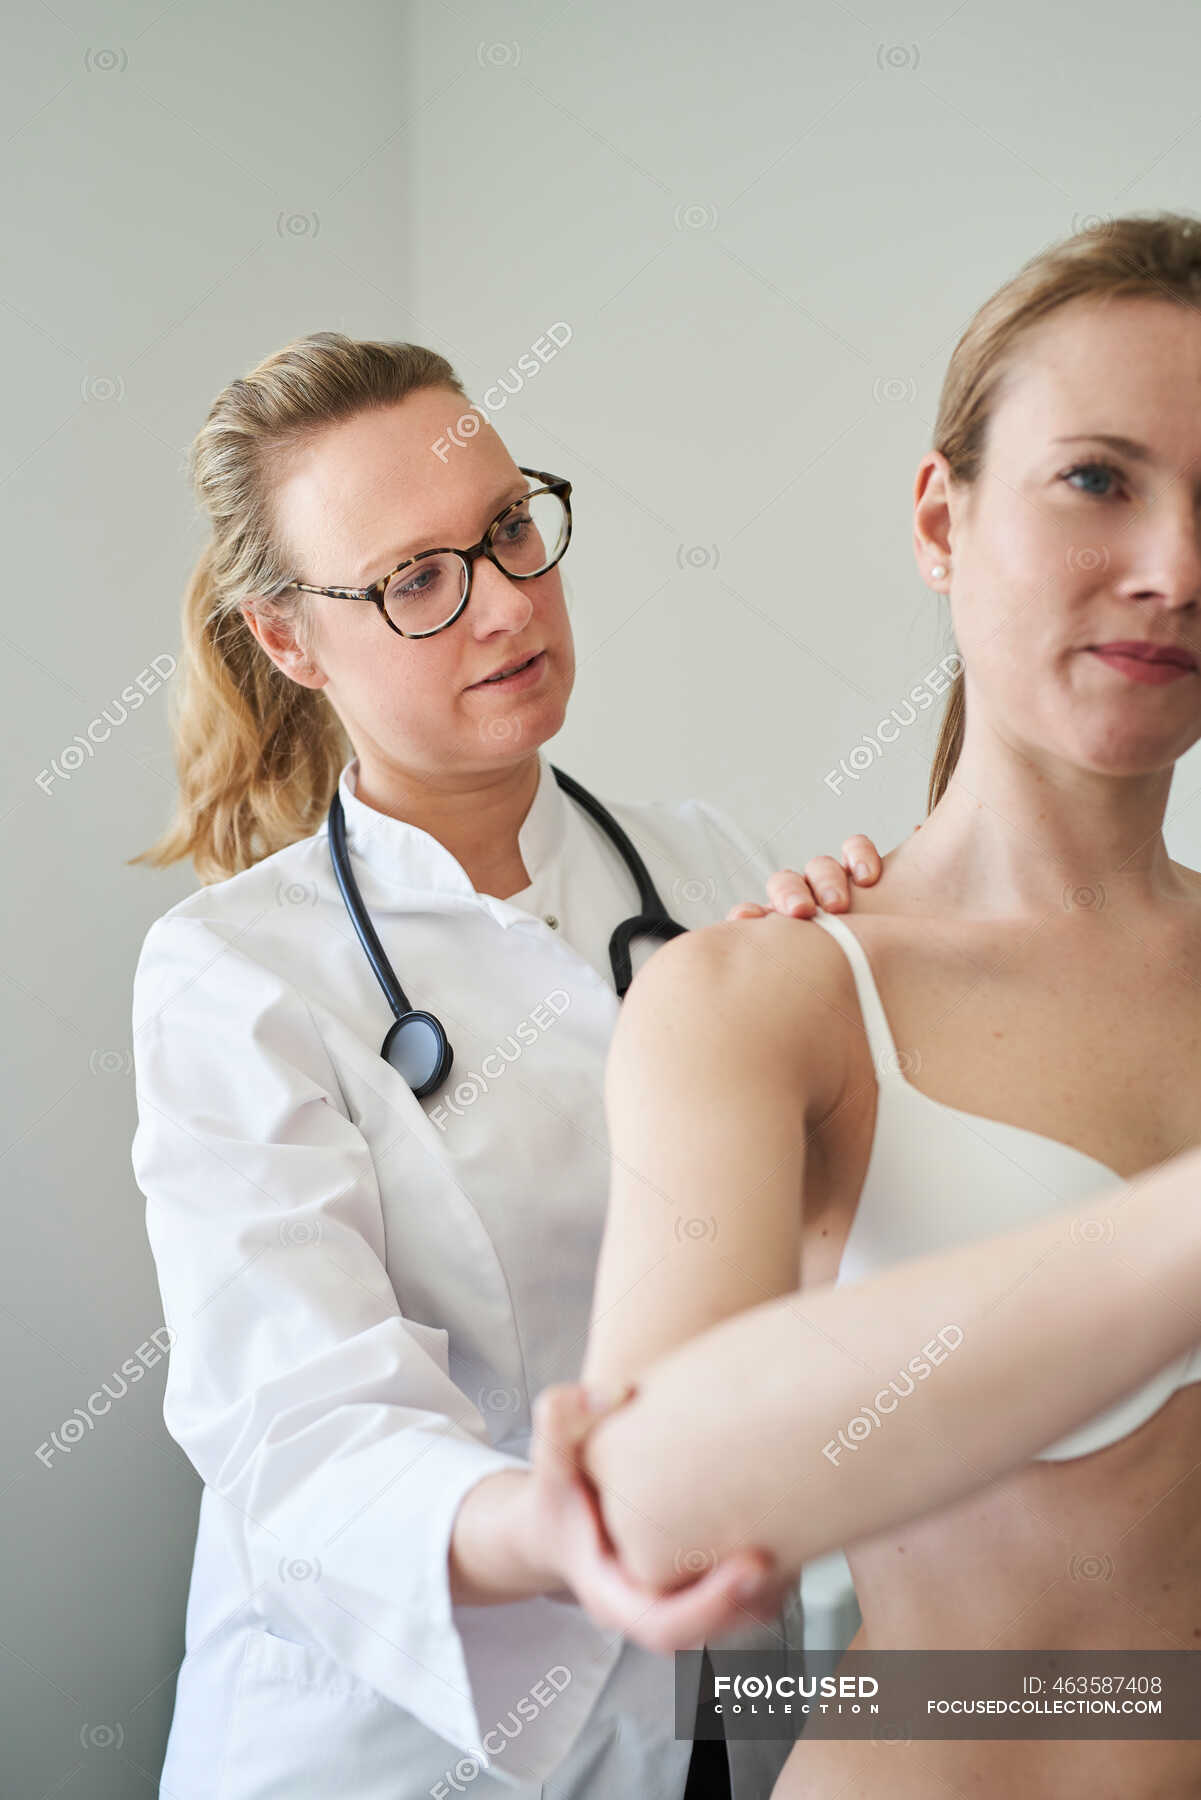 Female Doctor Examining Back Of Patient In Medical Practice